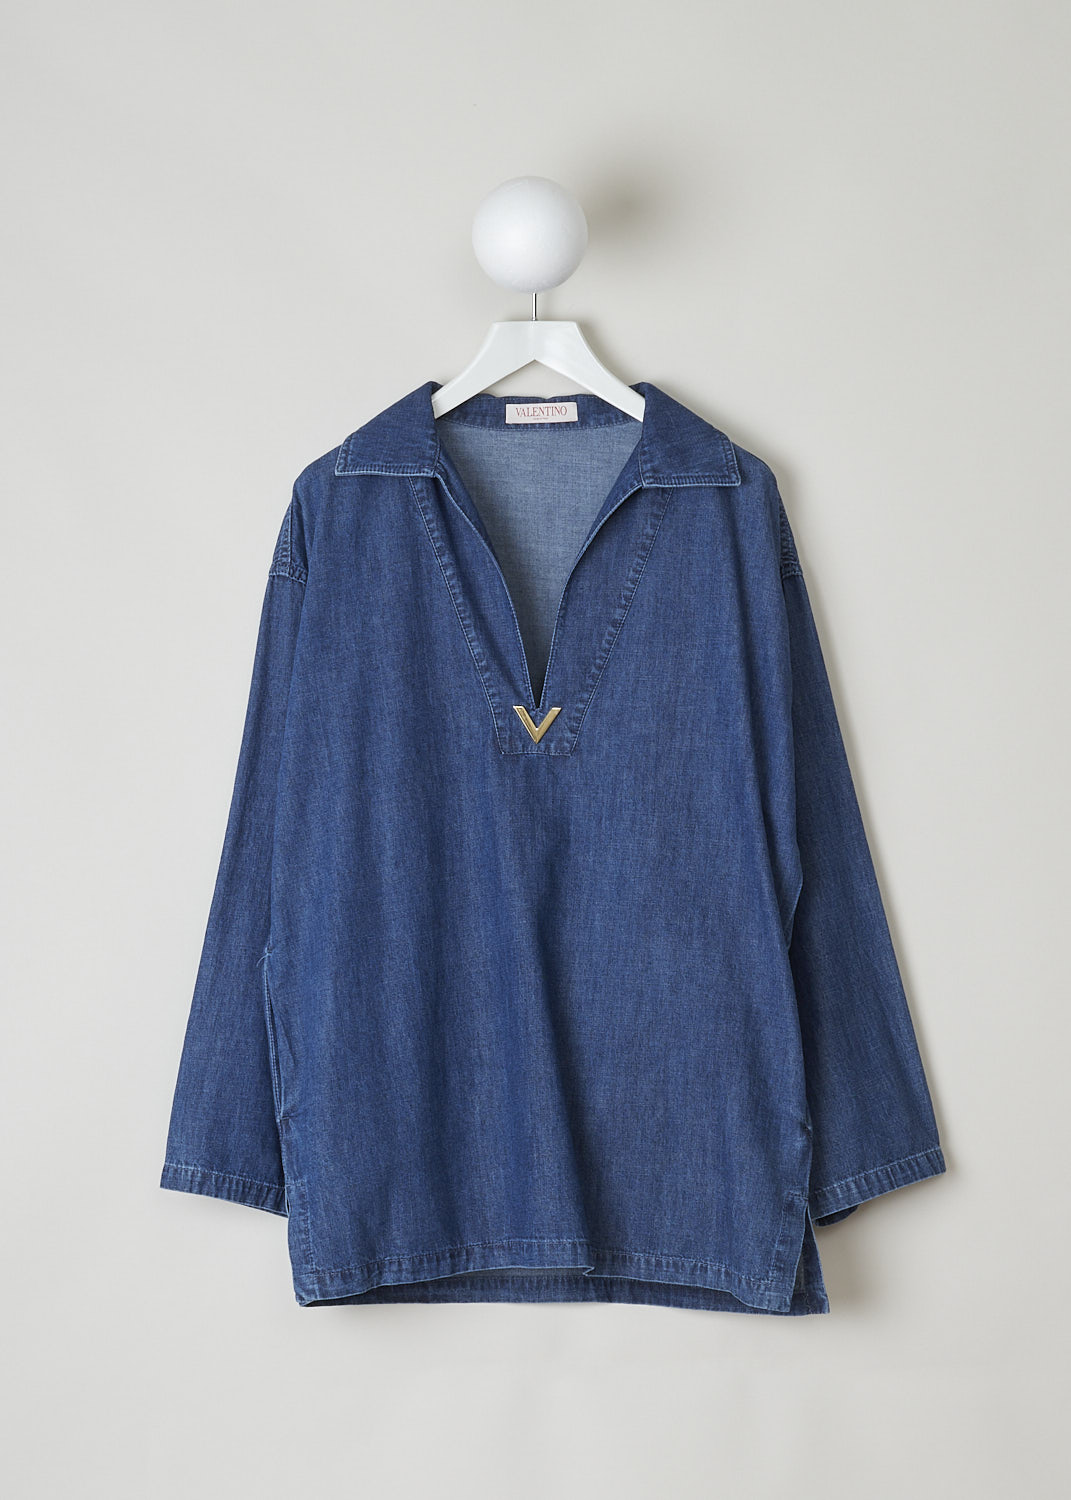 VALENTINO, DARK WASH DENIM TOP WITH DEEP V, 2B3DB01Z7MR_558, Blue, Front, This wide long sleeve top in a dark wash jean fabric has a spread collar with a deep V-neckline. The end of the V-neck is decorated with the brands signature V. Slanted pockets are concealed in the side seams. The top has a straight hemline. Small slits can be found on either side. 
